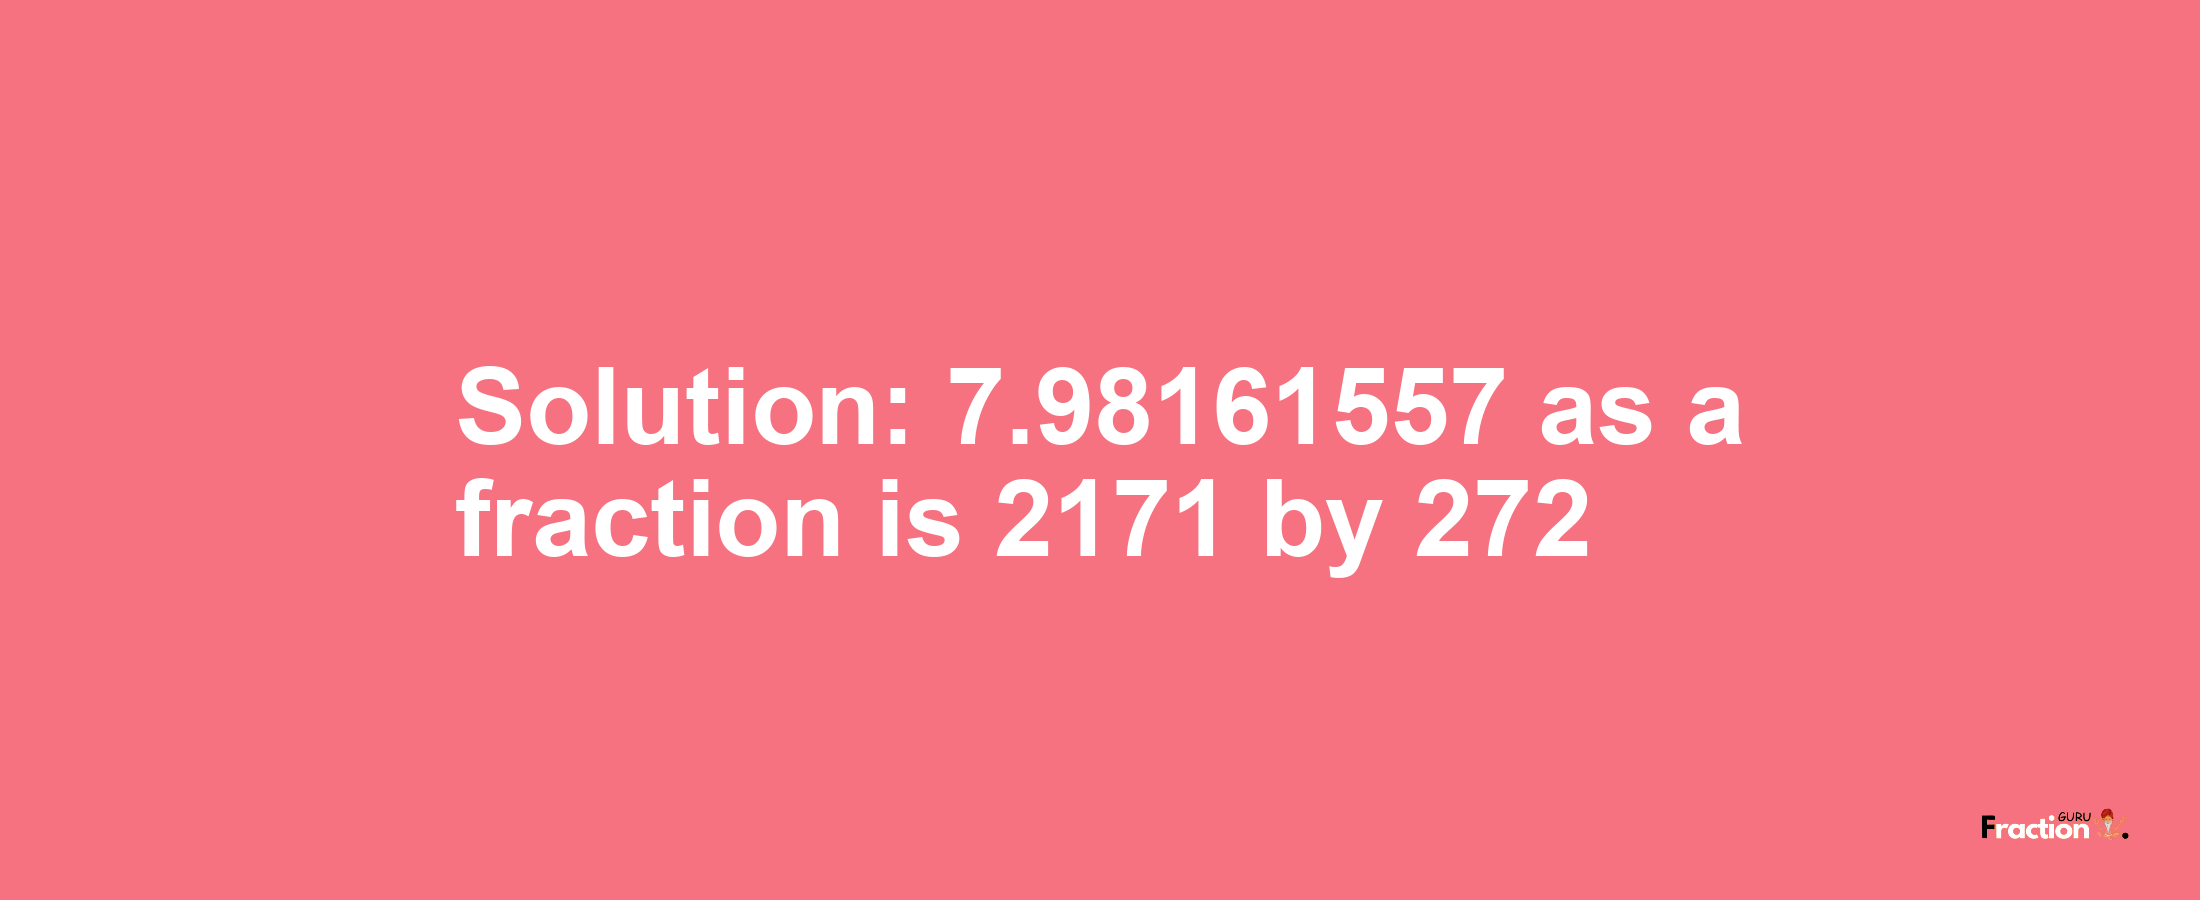 Solution:7.98161557 as a fraction is 2171/272